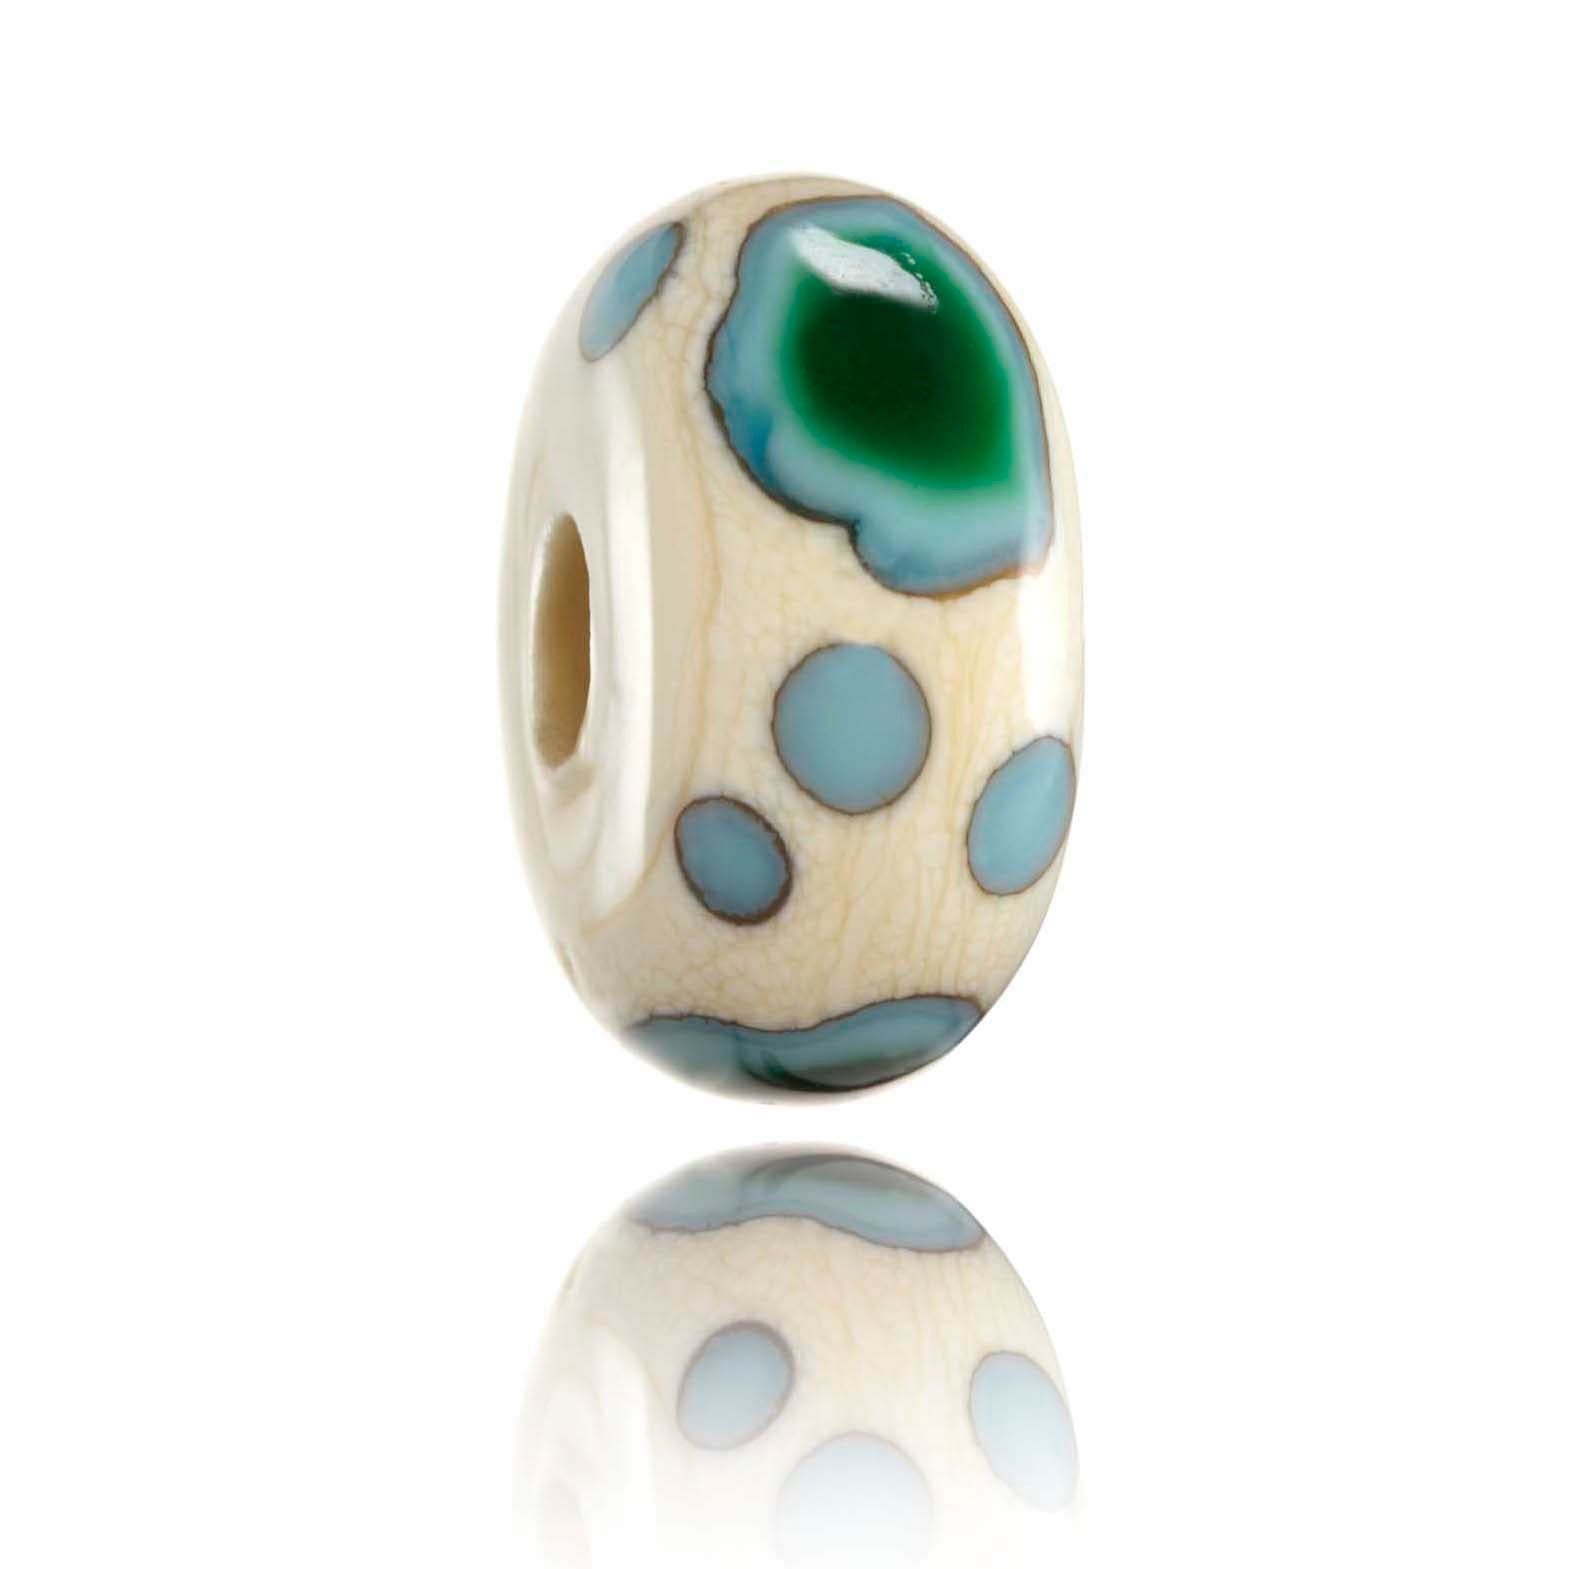 Cream glass bead with green dots representing the Fijian Islands.